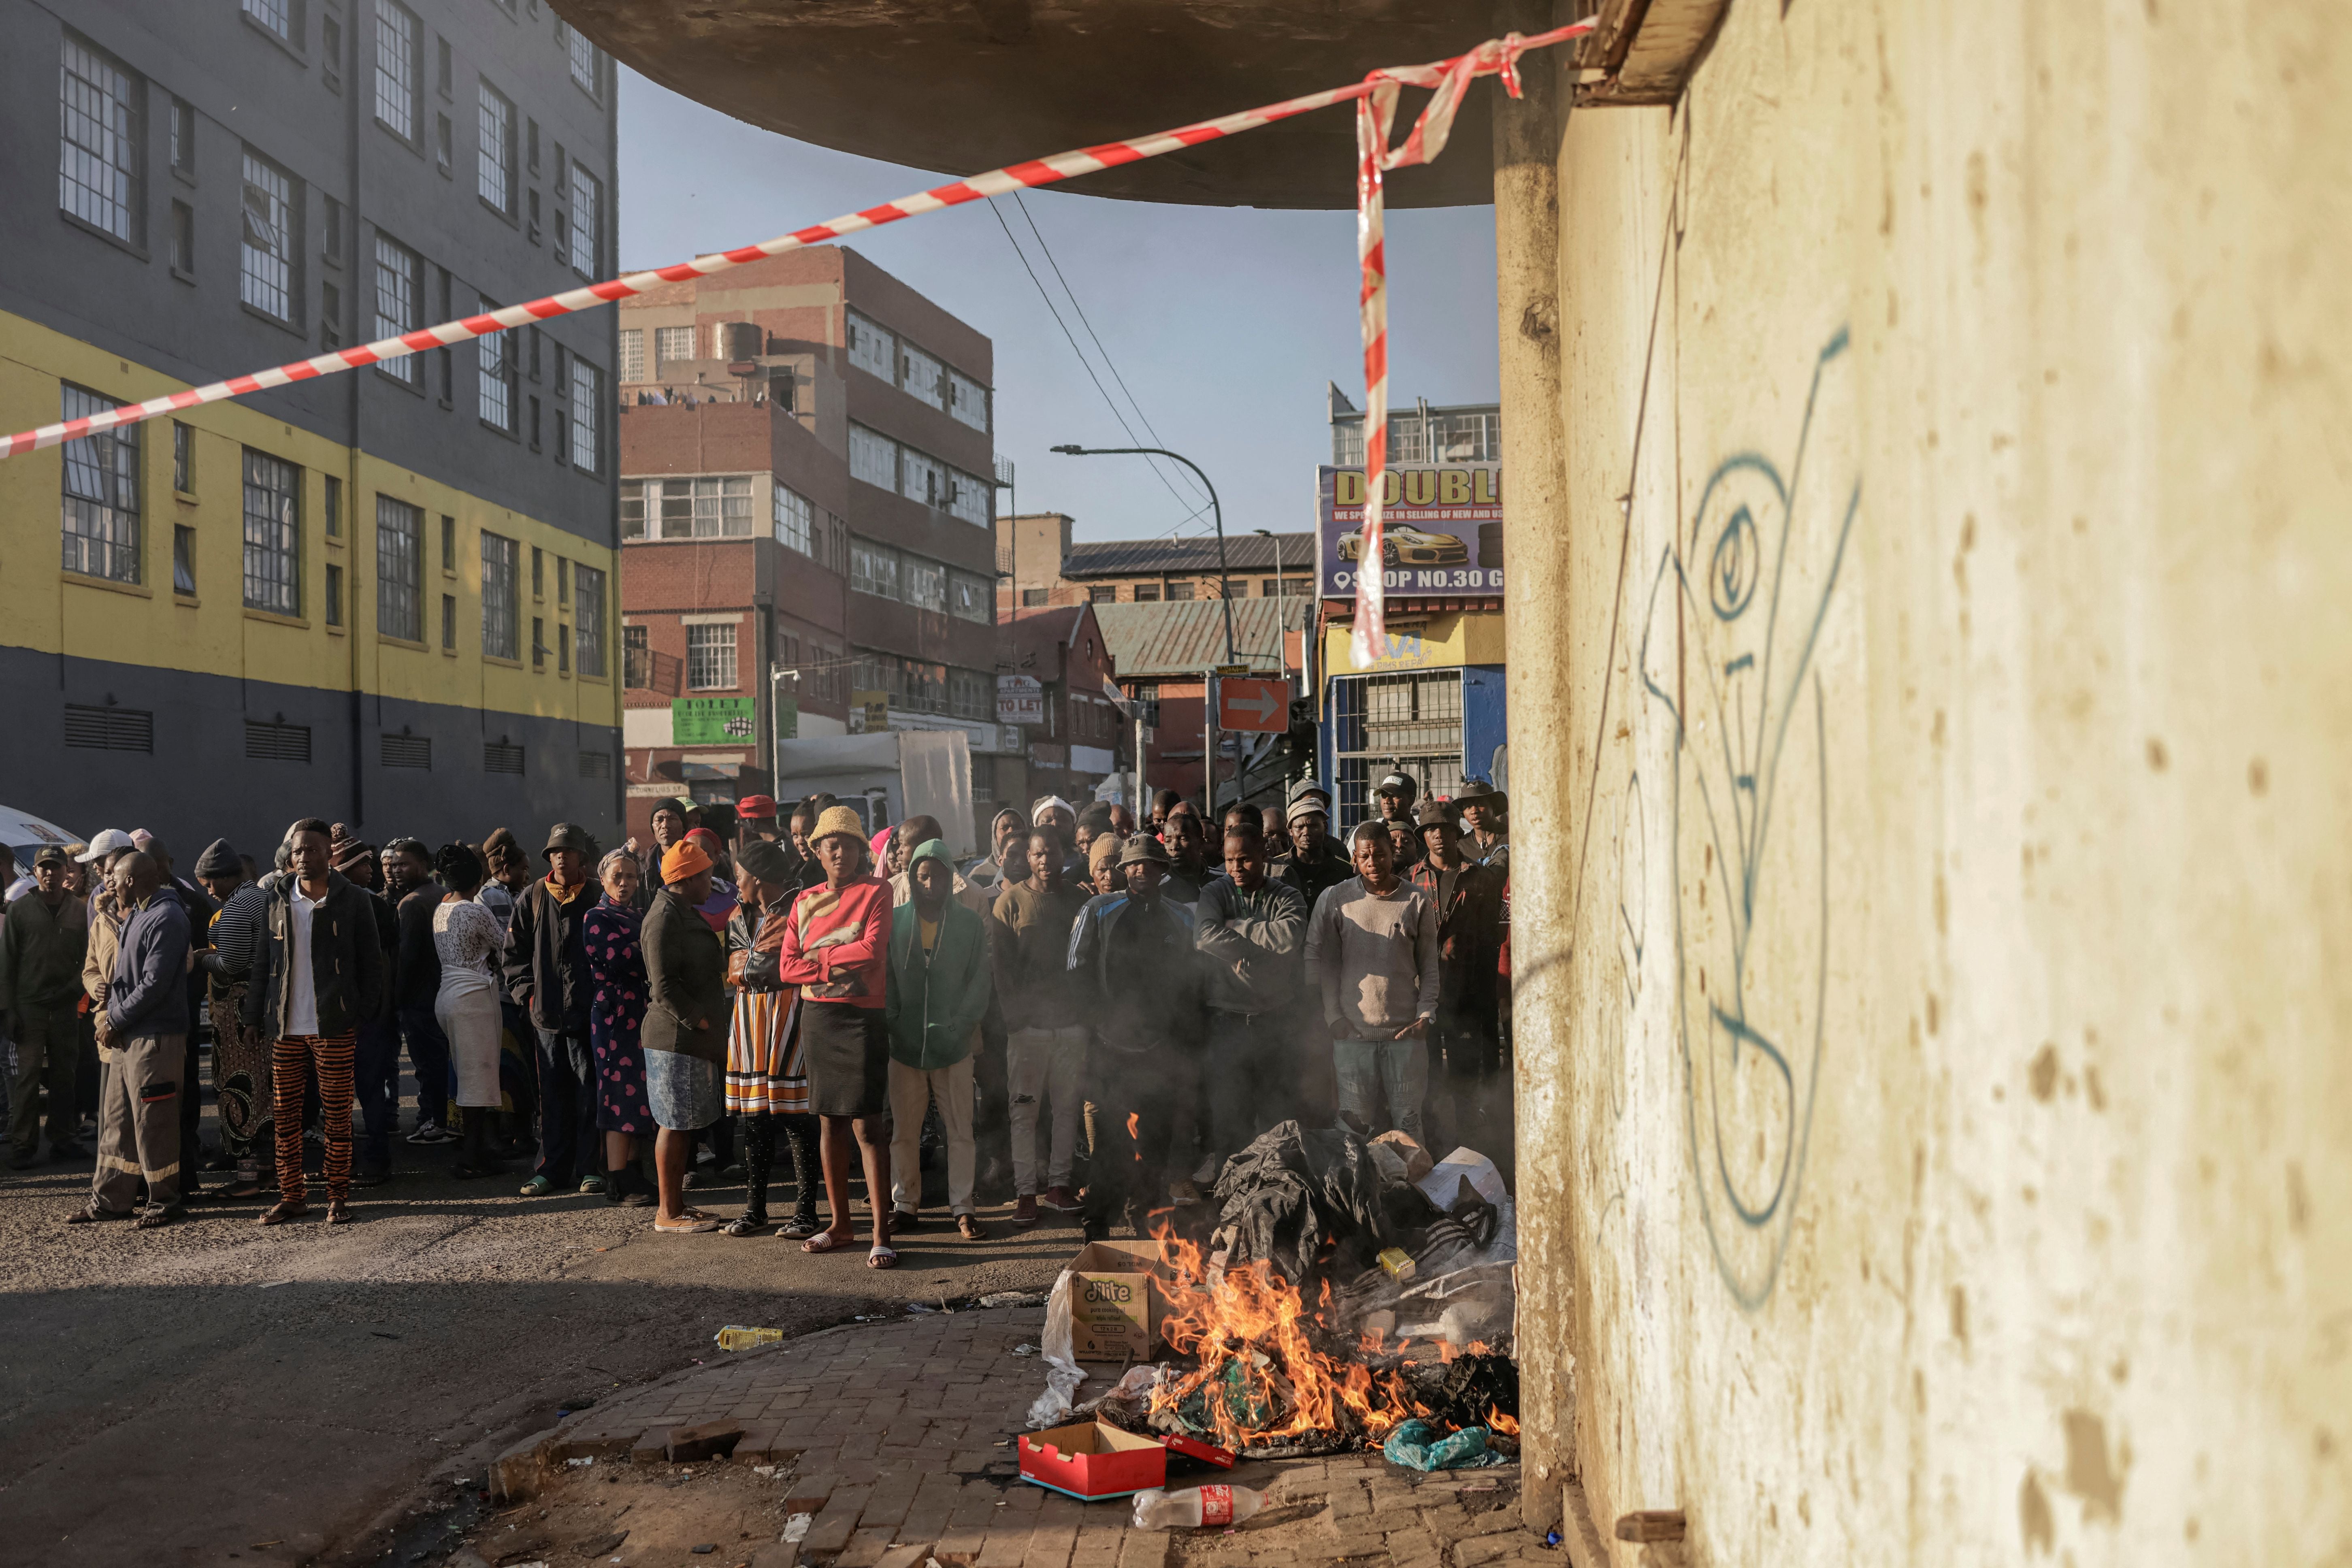 <p> People standing at a bonfire look on as unseen firefighters work at the scene of a fire in a building in Johannesburg on 31 August. </p>